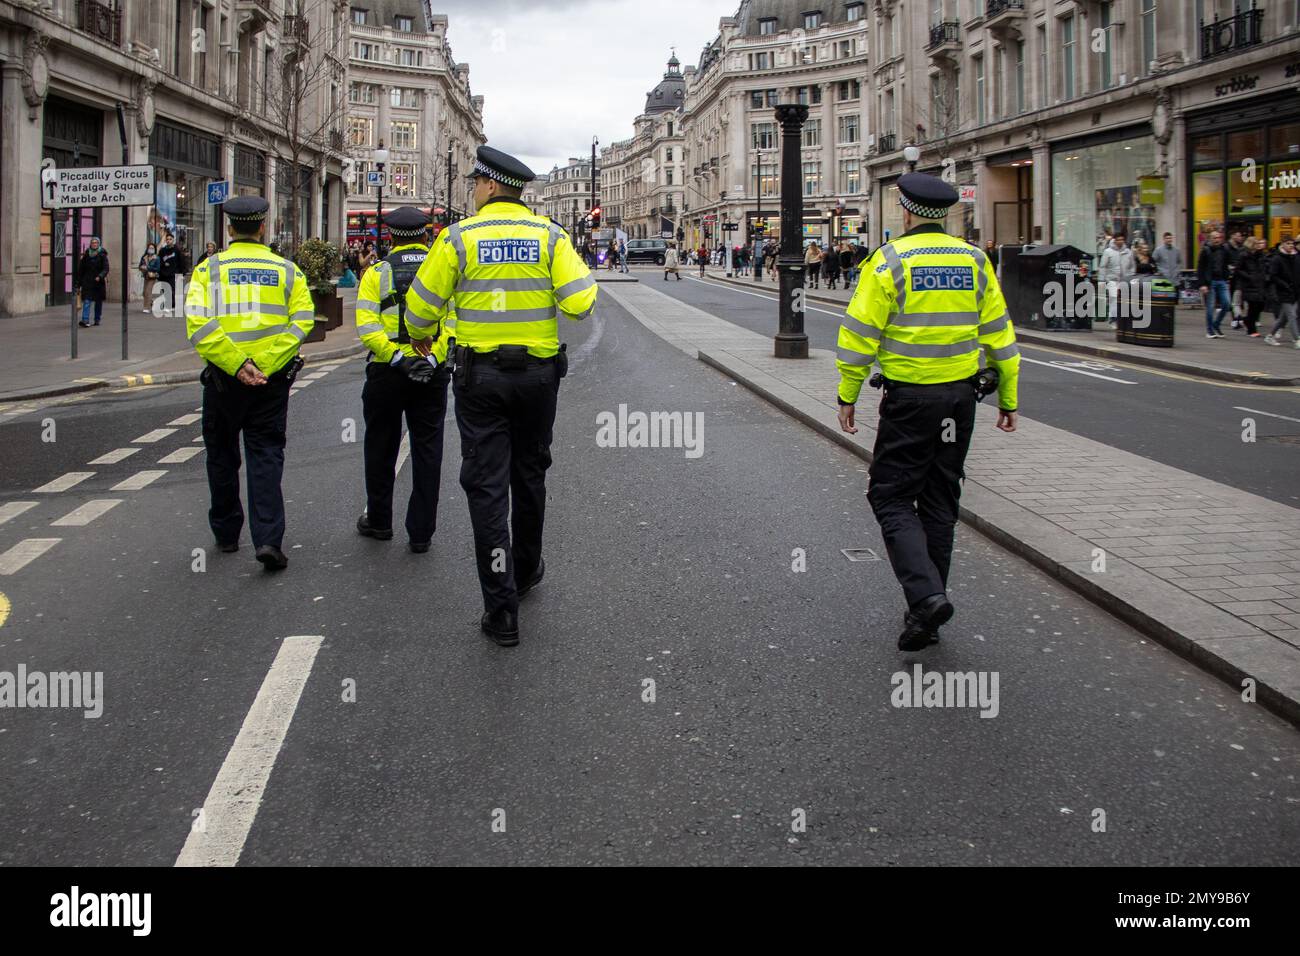 London, UK – Feb 4, 2023: Police walking in front of Iranian Protesters as they march toward Trafalgar Sq. About two hundred British-Iranians from different political backgrounds marched from Cavendish Square to Trafalgar Square, asking the UK government to put the Islamic Revolutionary Guard Corps of Iran on its terrorist list.  Credit: Sinai Noor/Alamy Live News Stock Photo